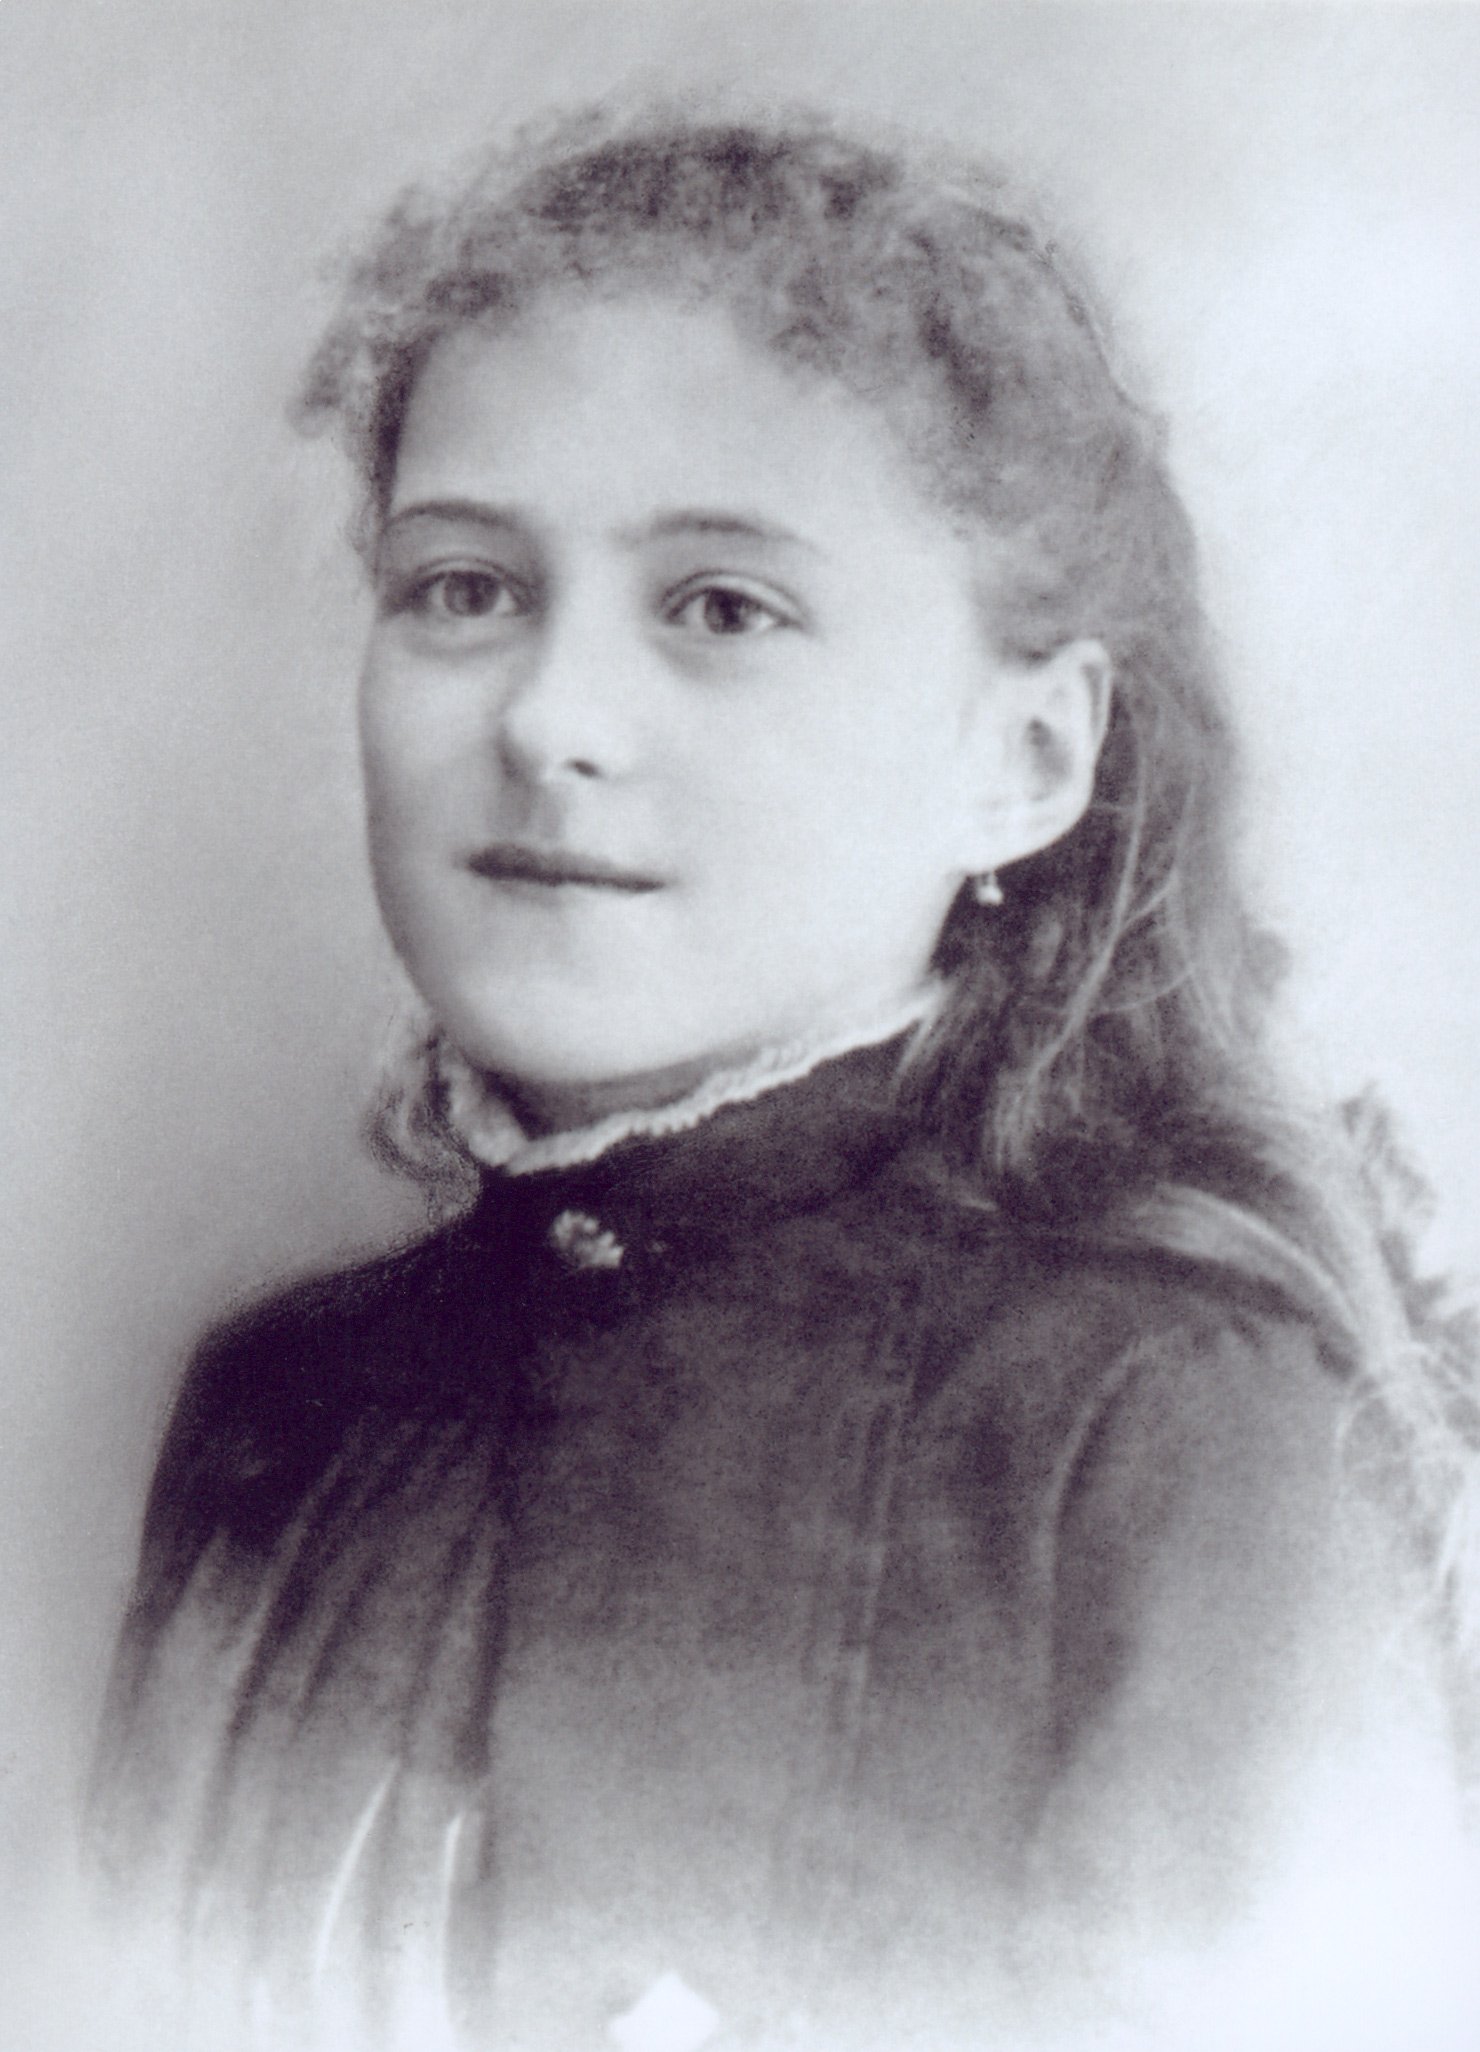 Photo of St. Therese at age eight.